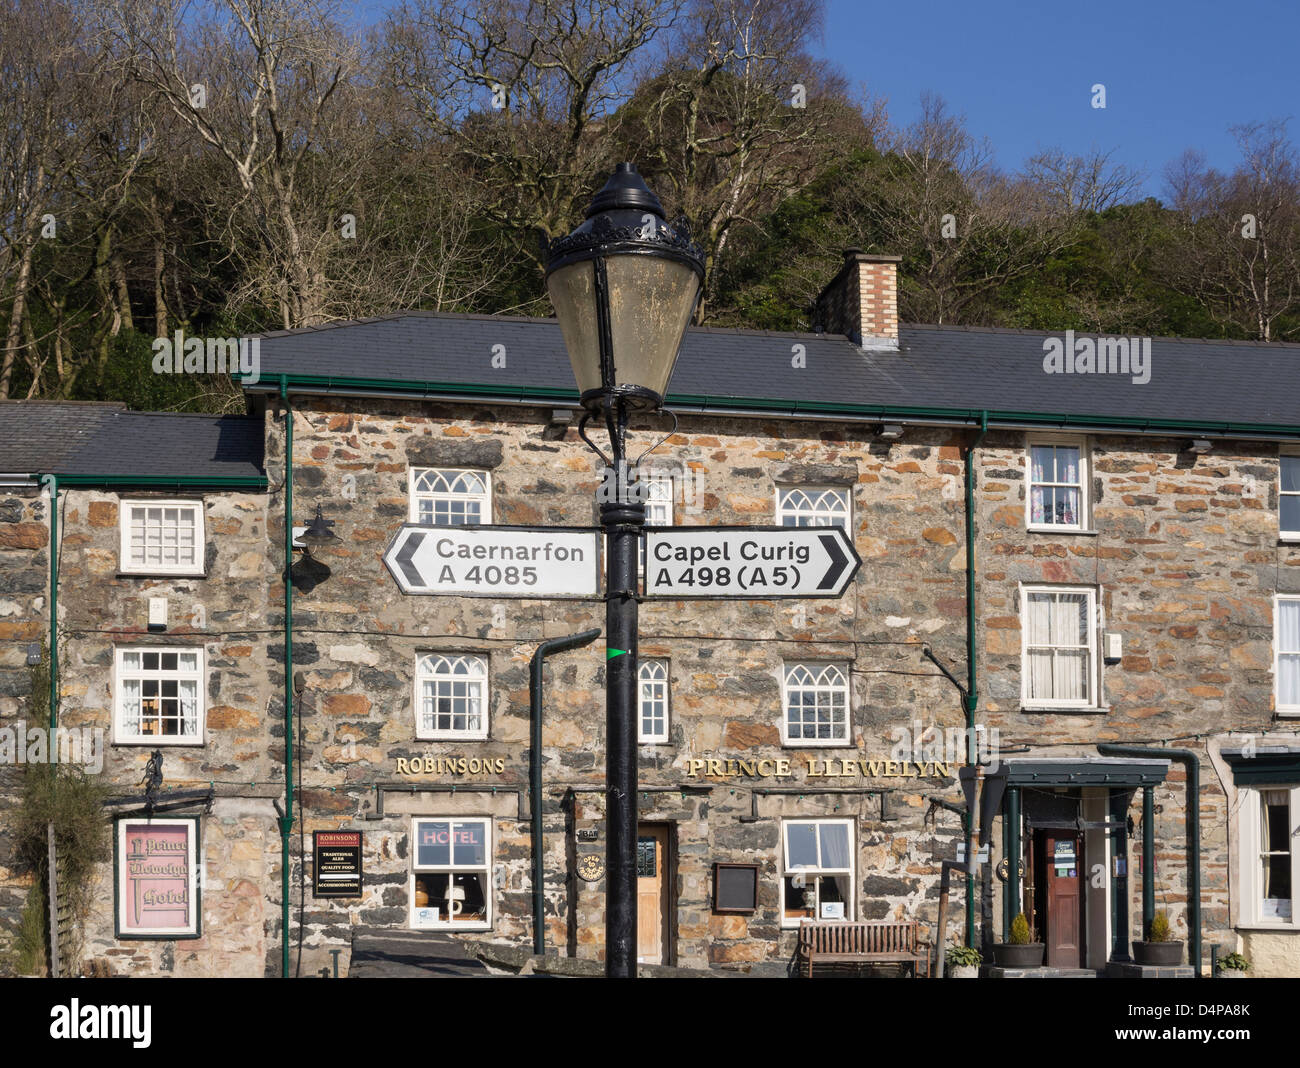 Direction signpost on an old fashioned lamppost by Prince Llewelyn Hotel in Beddgelert, Gwynedd, North Wales, UK, Britain Stock Photo